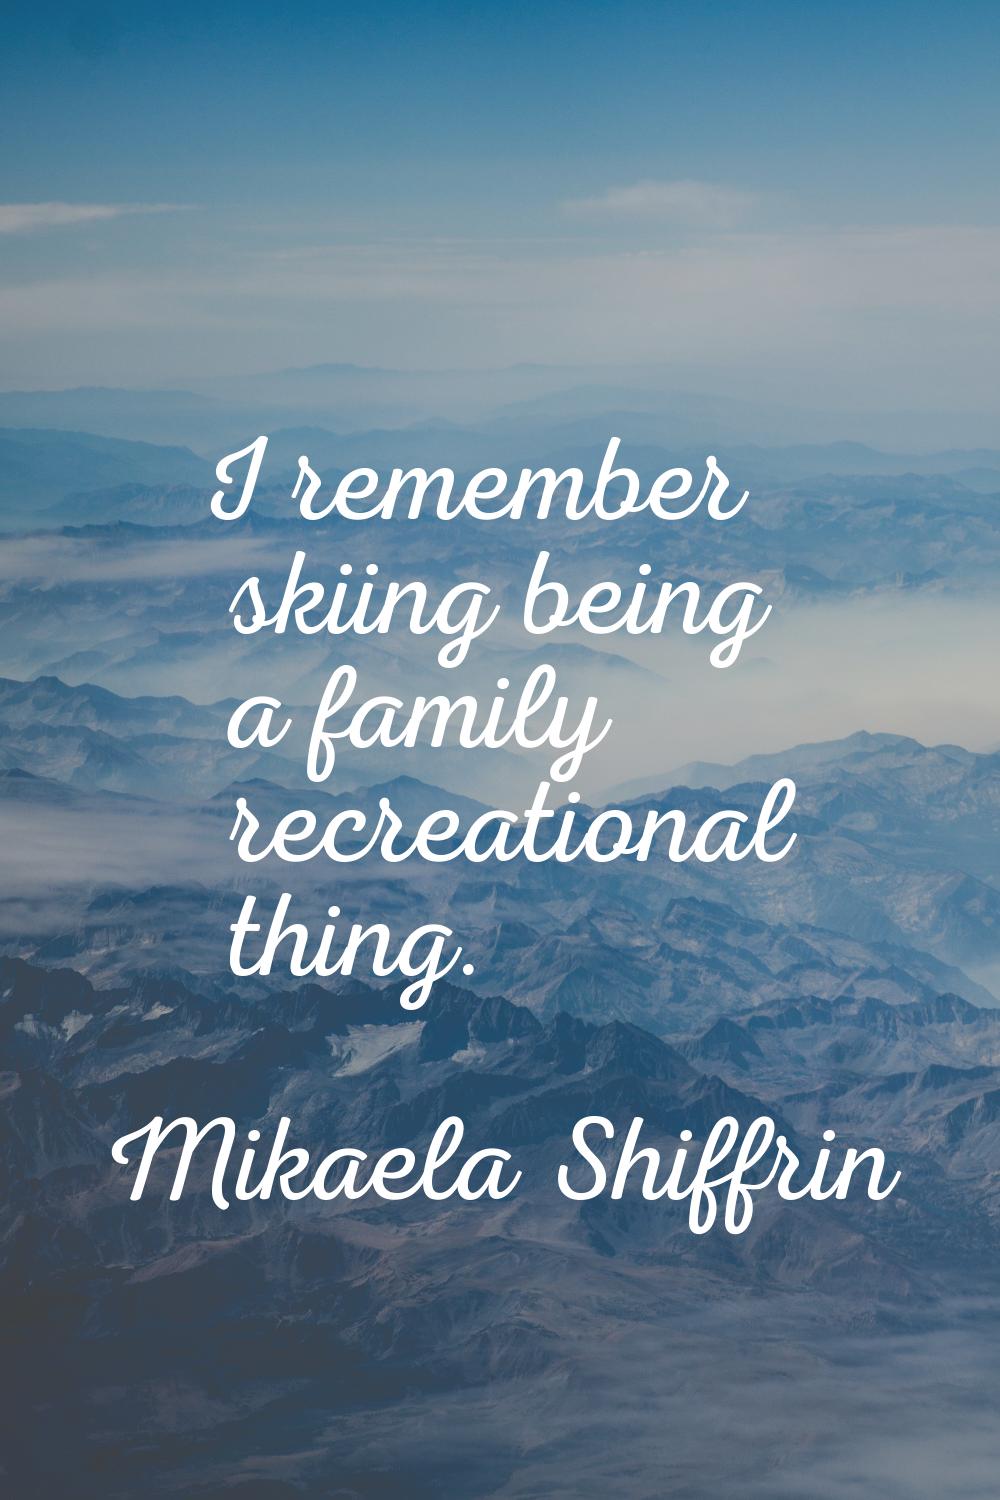 I remember skiing being a family recreational thing.